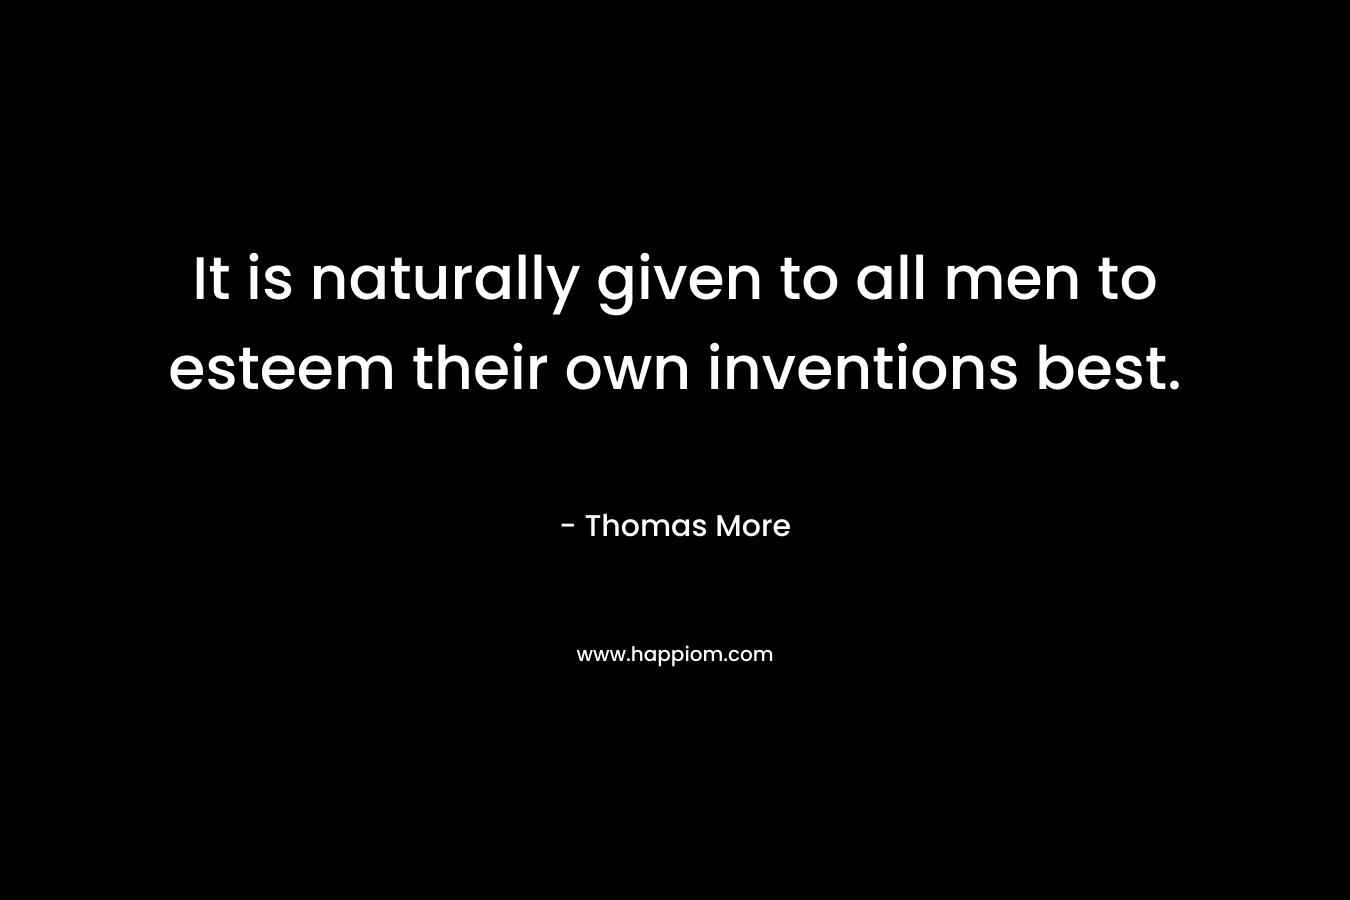 It is naturally given to all men to esteem their own inventions best. – Thomas More